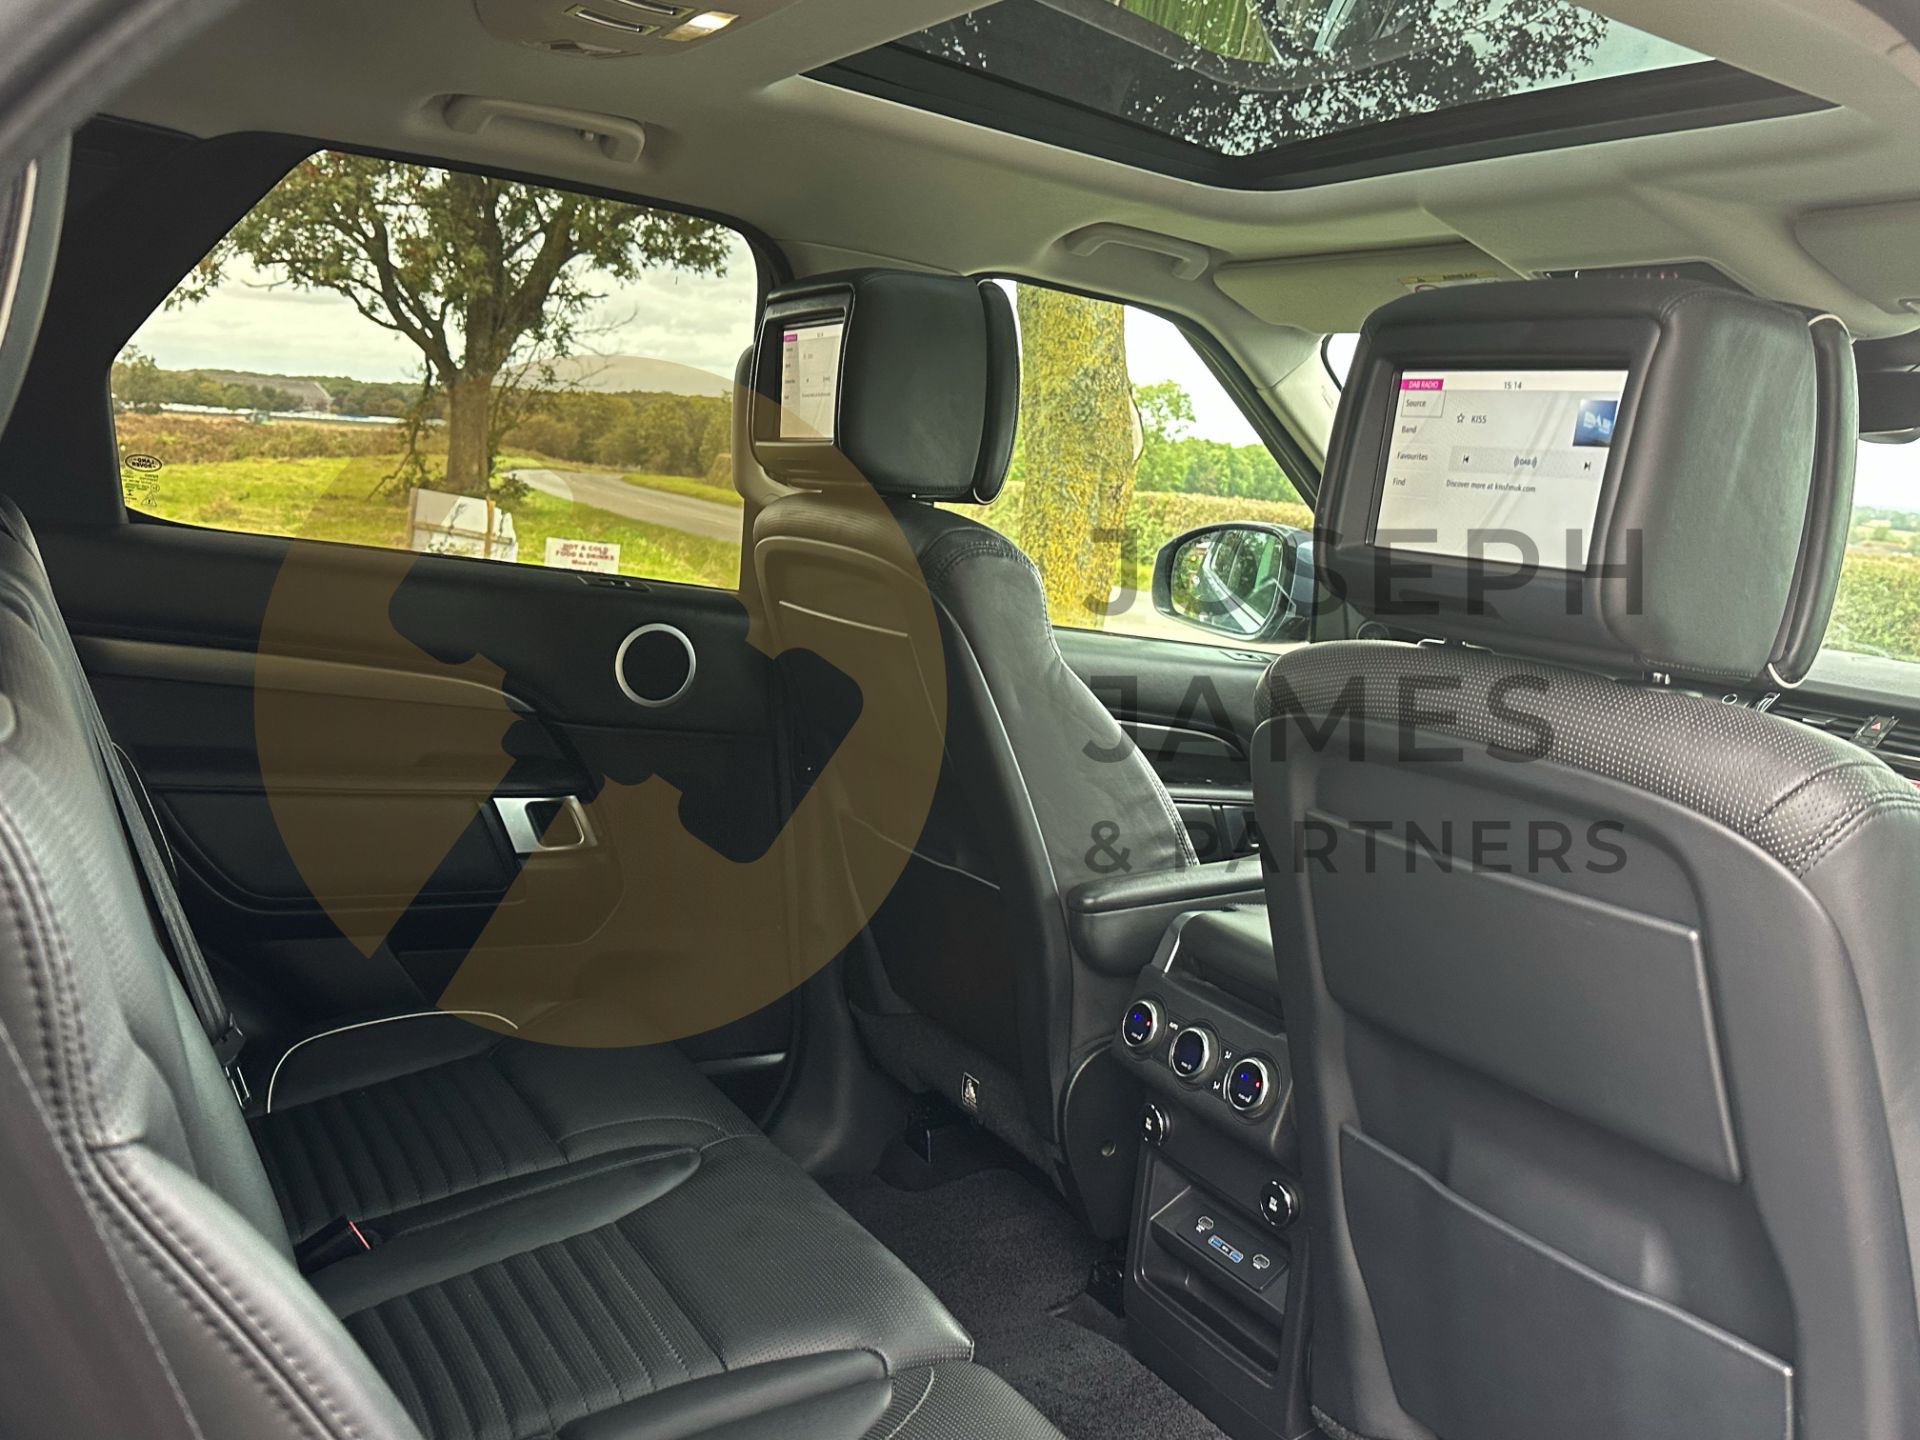 (ON SALE) LAND ROVER DISCOVERY 5 *HSE LUXURY* 7 SEATER SUV (2018 - FACELIFT MODEL) (LOW MILEAGE) - Image 37 of 66